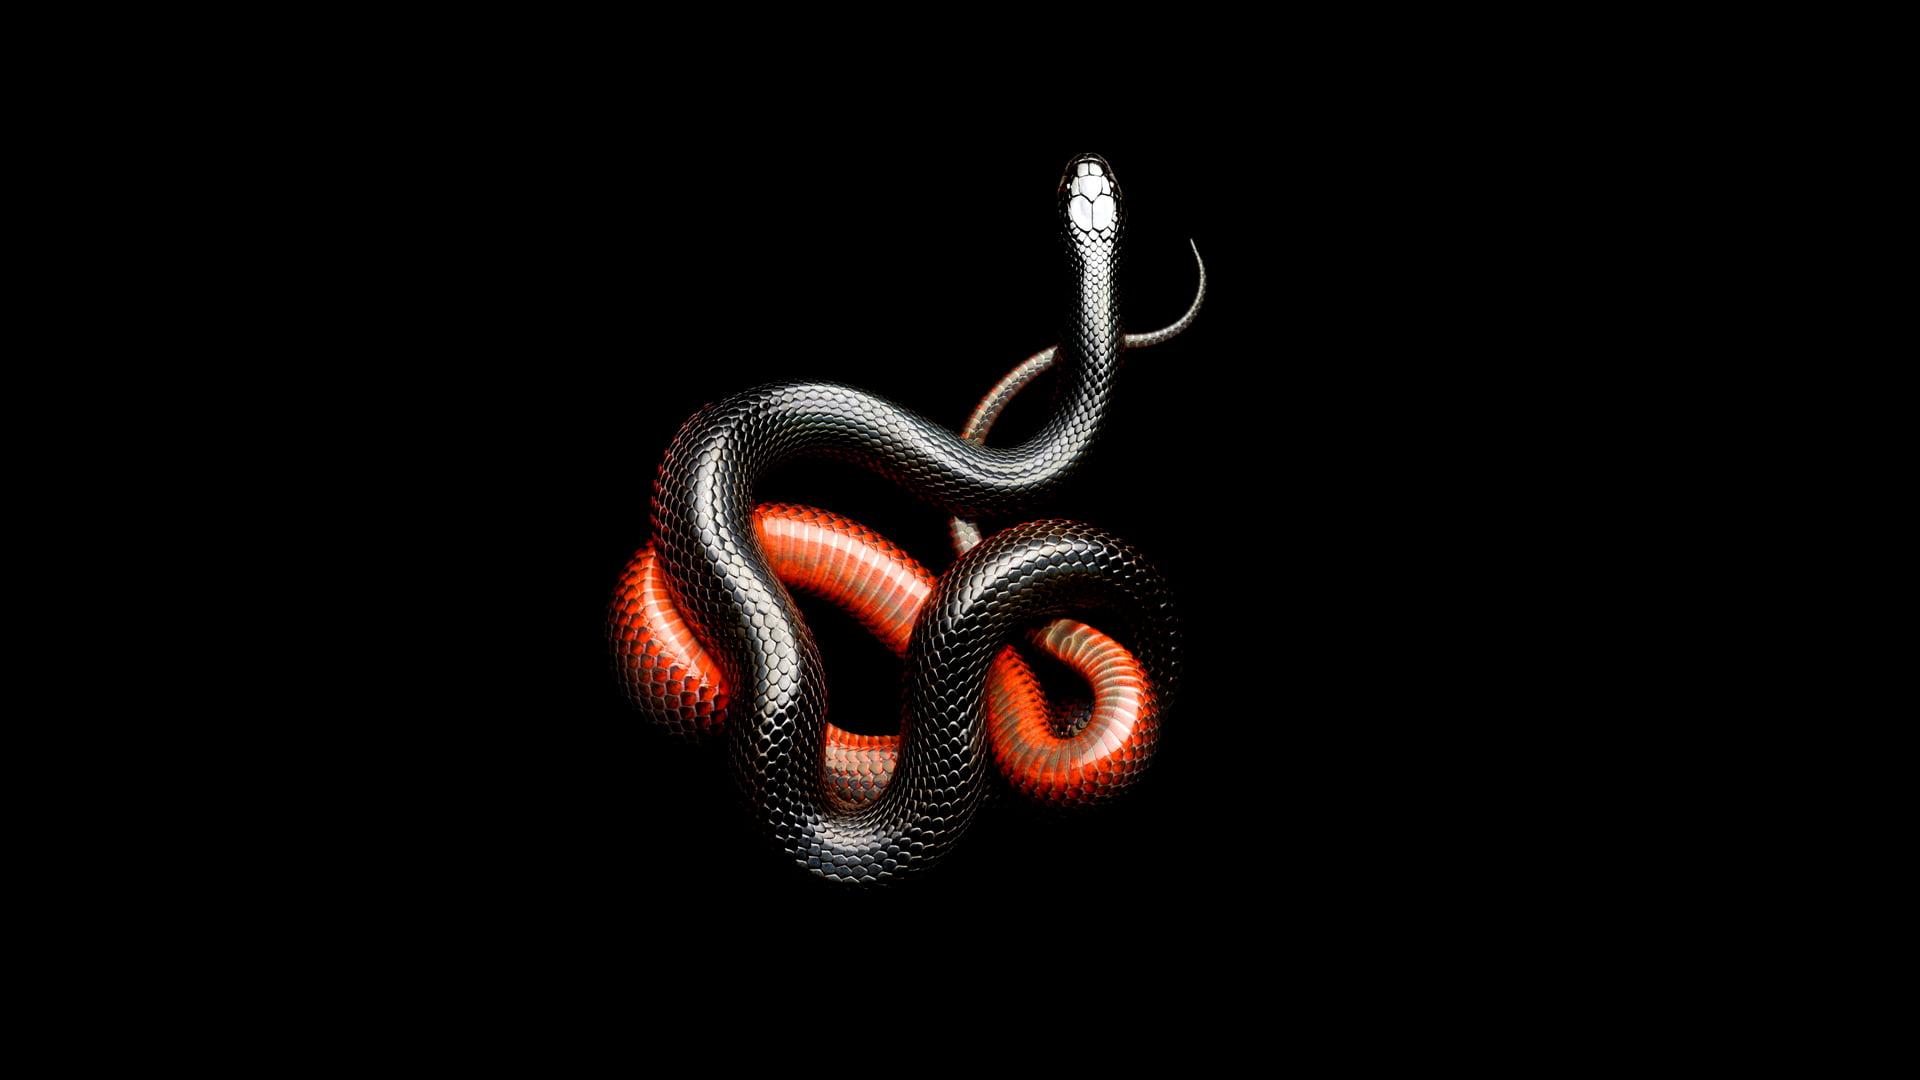 Snake Wallpapers Hd Wallpaper Cave Images